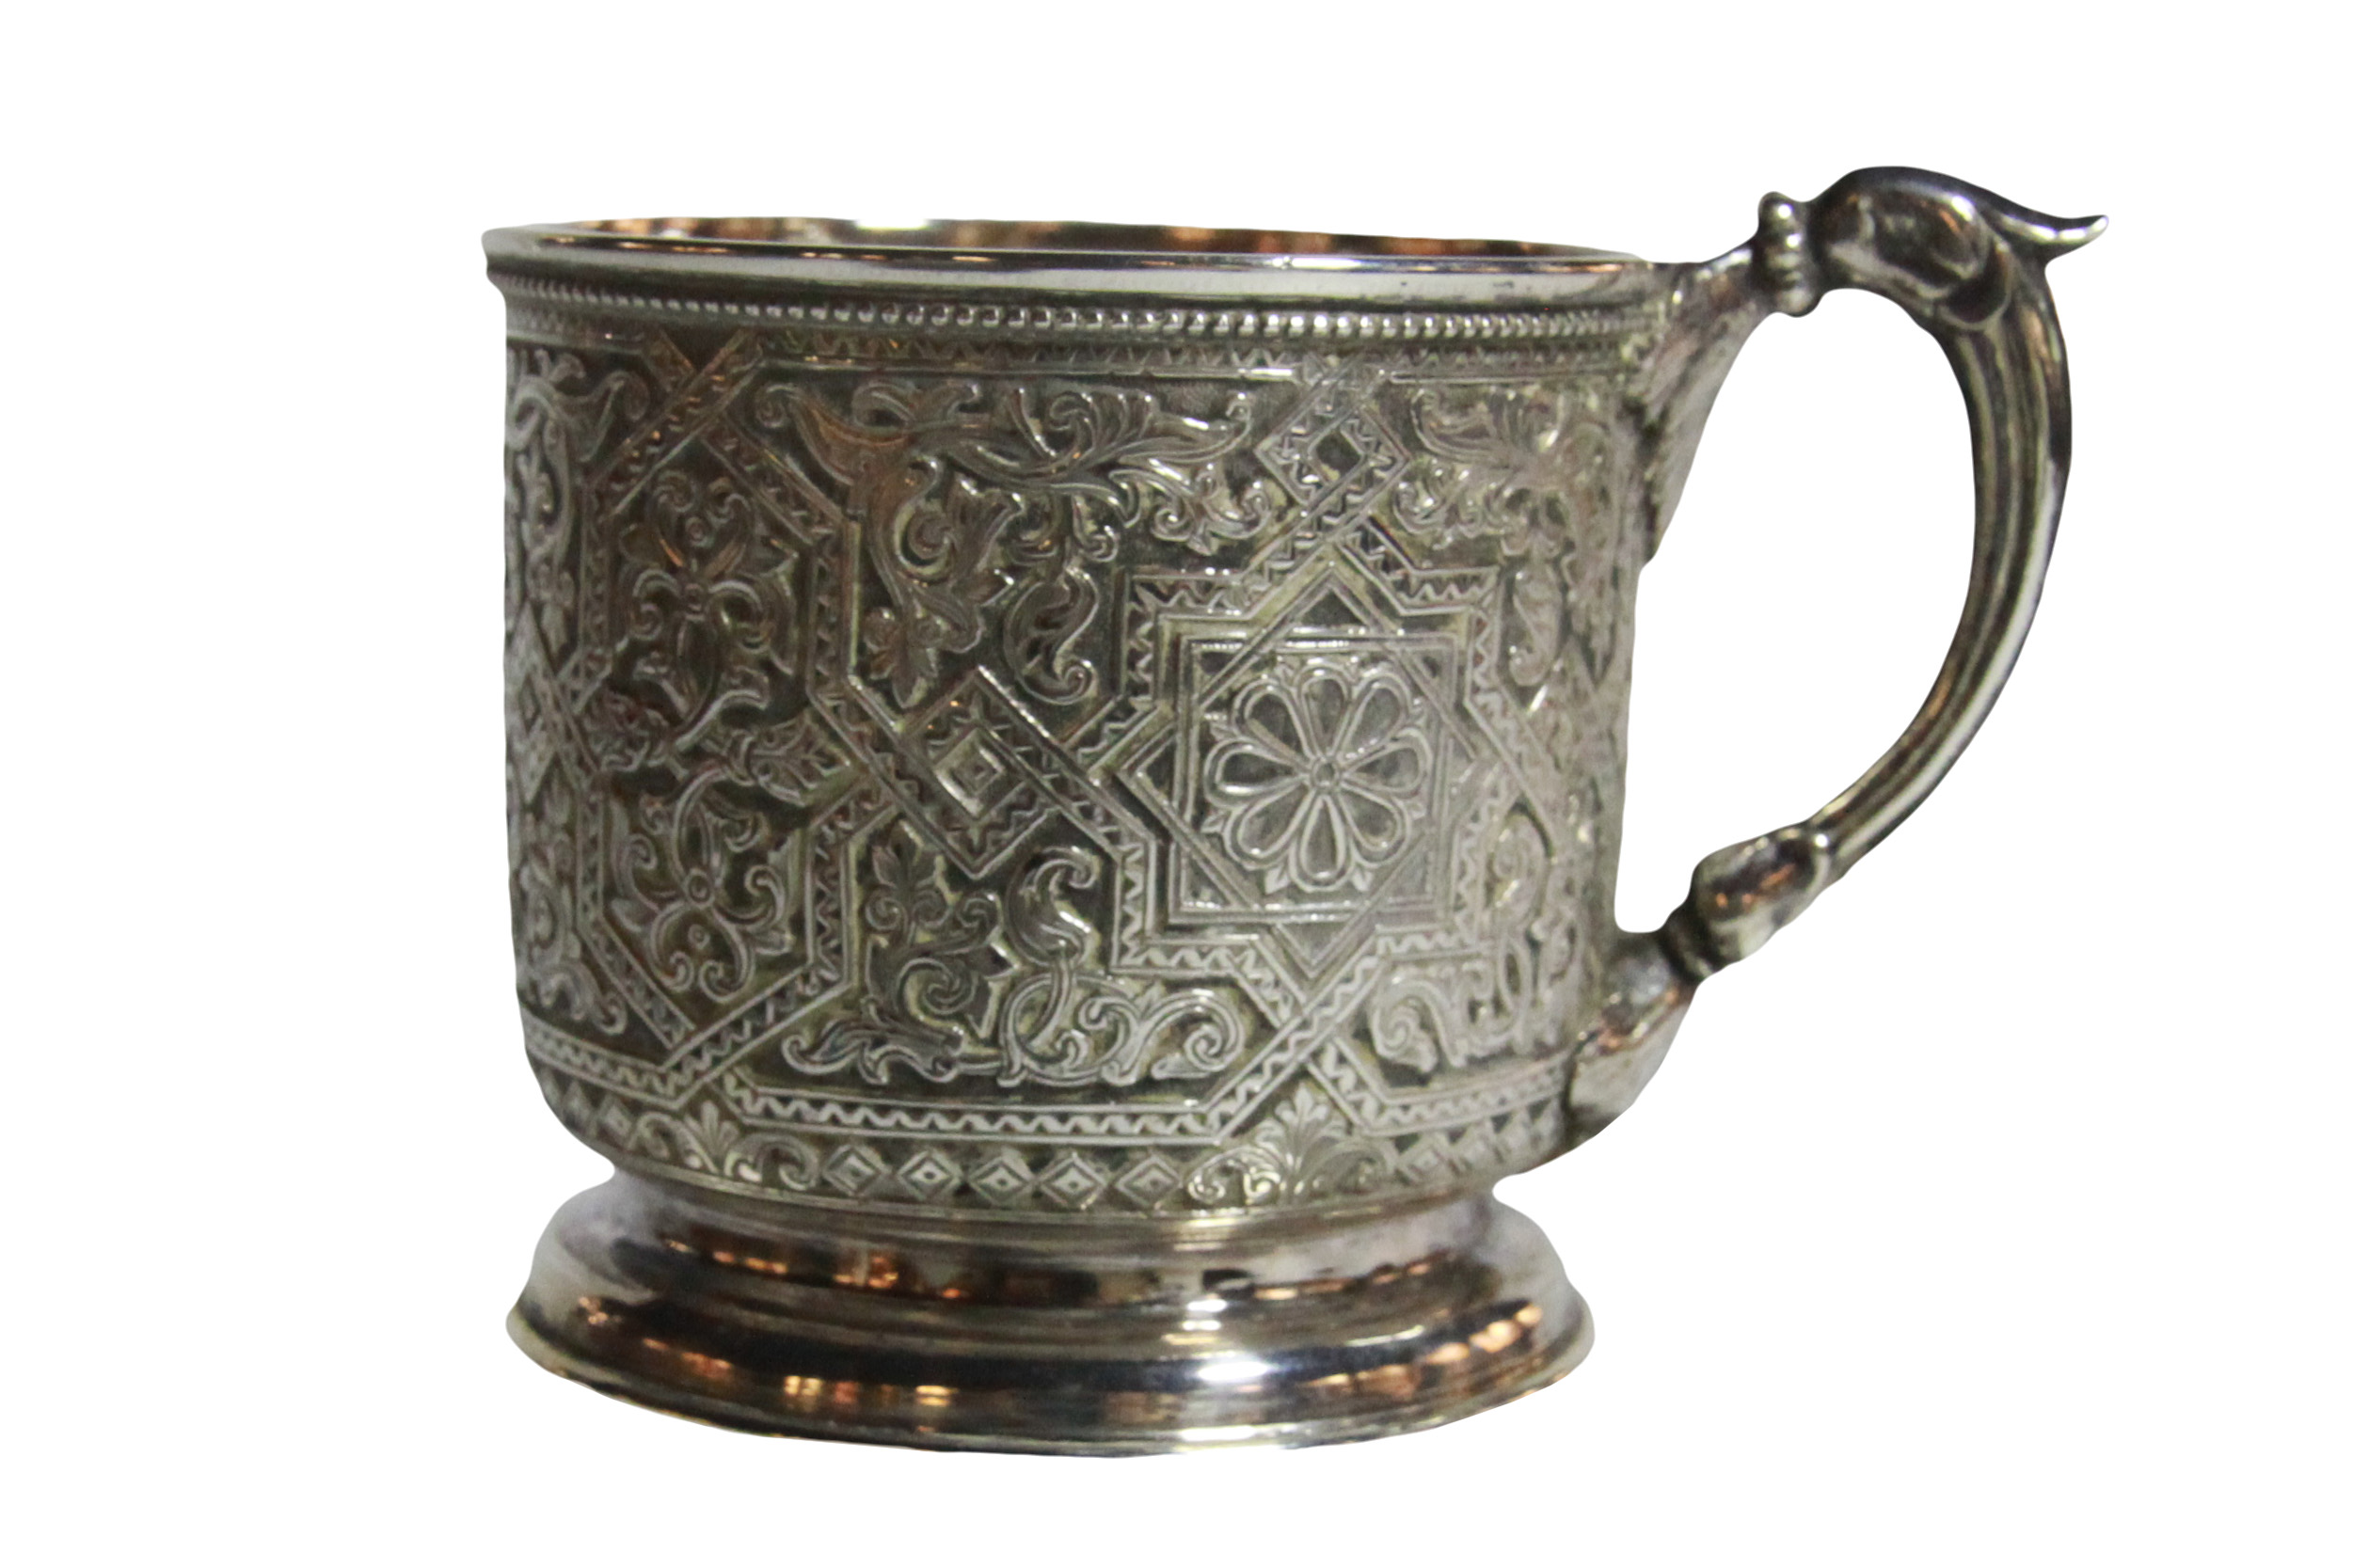 A good Russian silver gilt-lined cup of unusual geometric design. Moscow. A. O - 1889, (H: 7 cm, 6